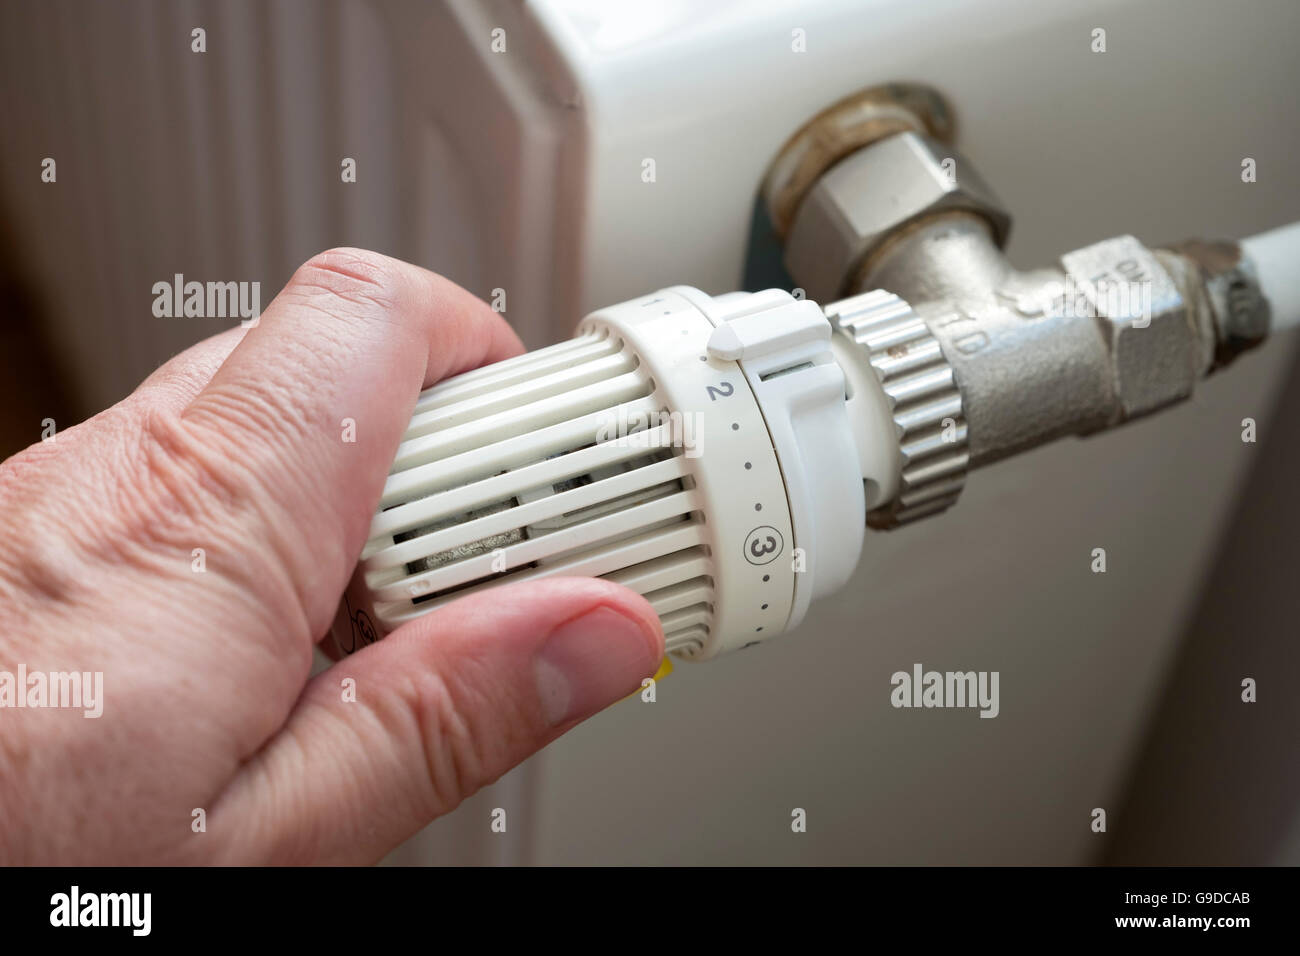 Man turning down thermostat on gas powered central heating radiator to save energy Stock Photo